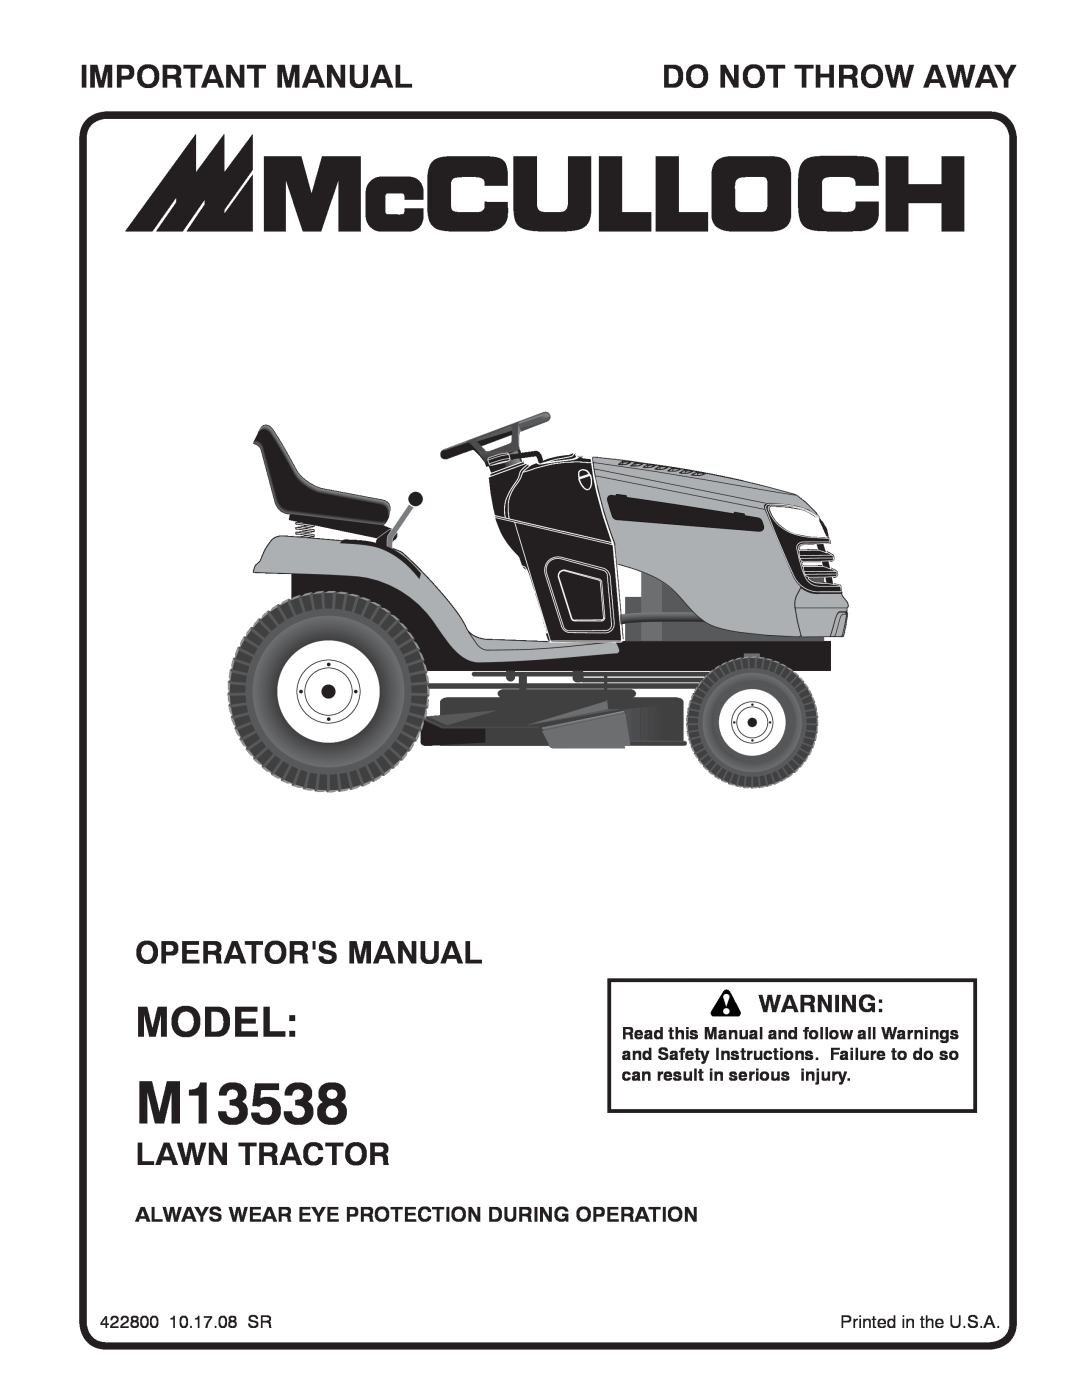 McCulloch 96041011600 manual Always Wear Eye Protection During Operation, M13538, Model, Important Manual, Lawn Tractor 